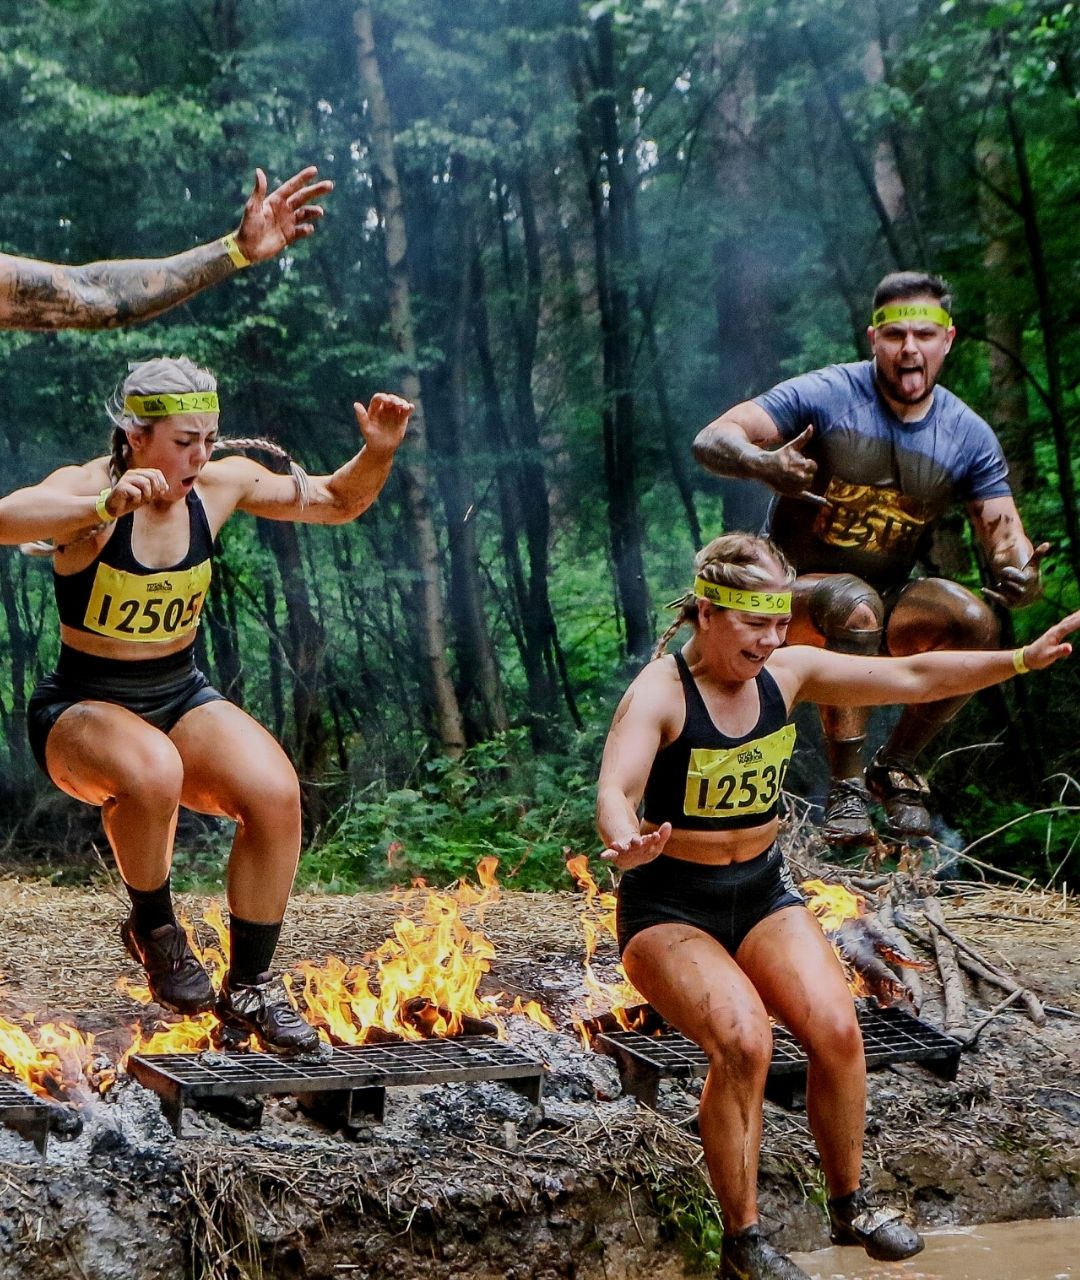 Competitors jump over fire into mud